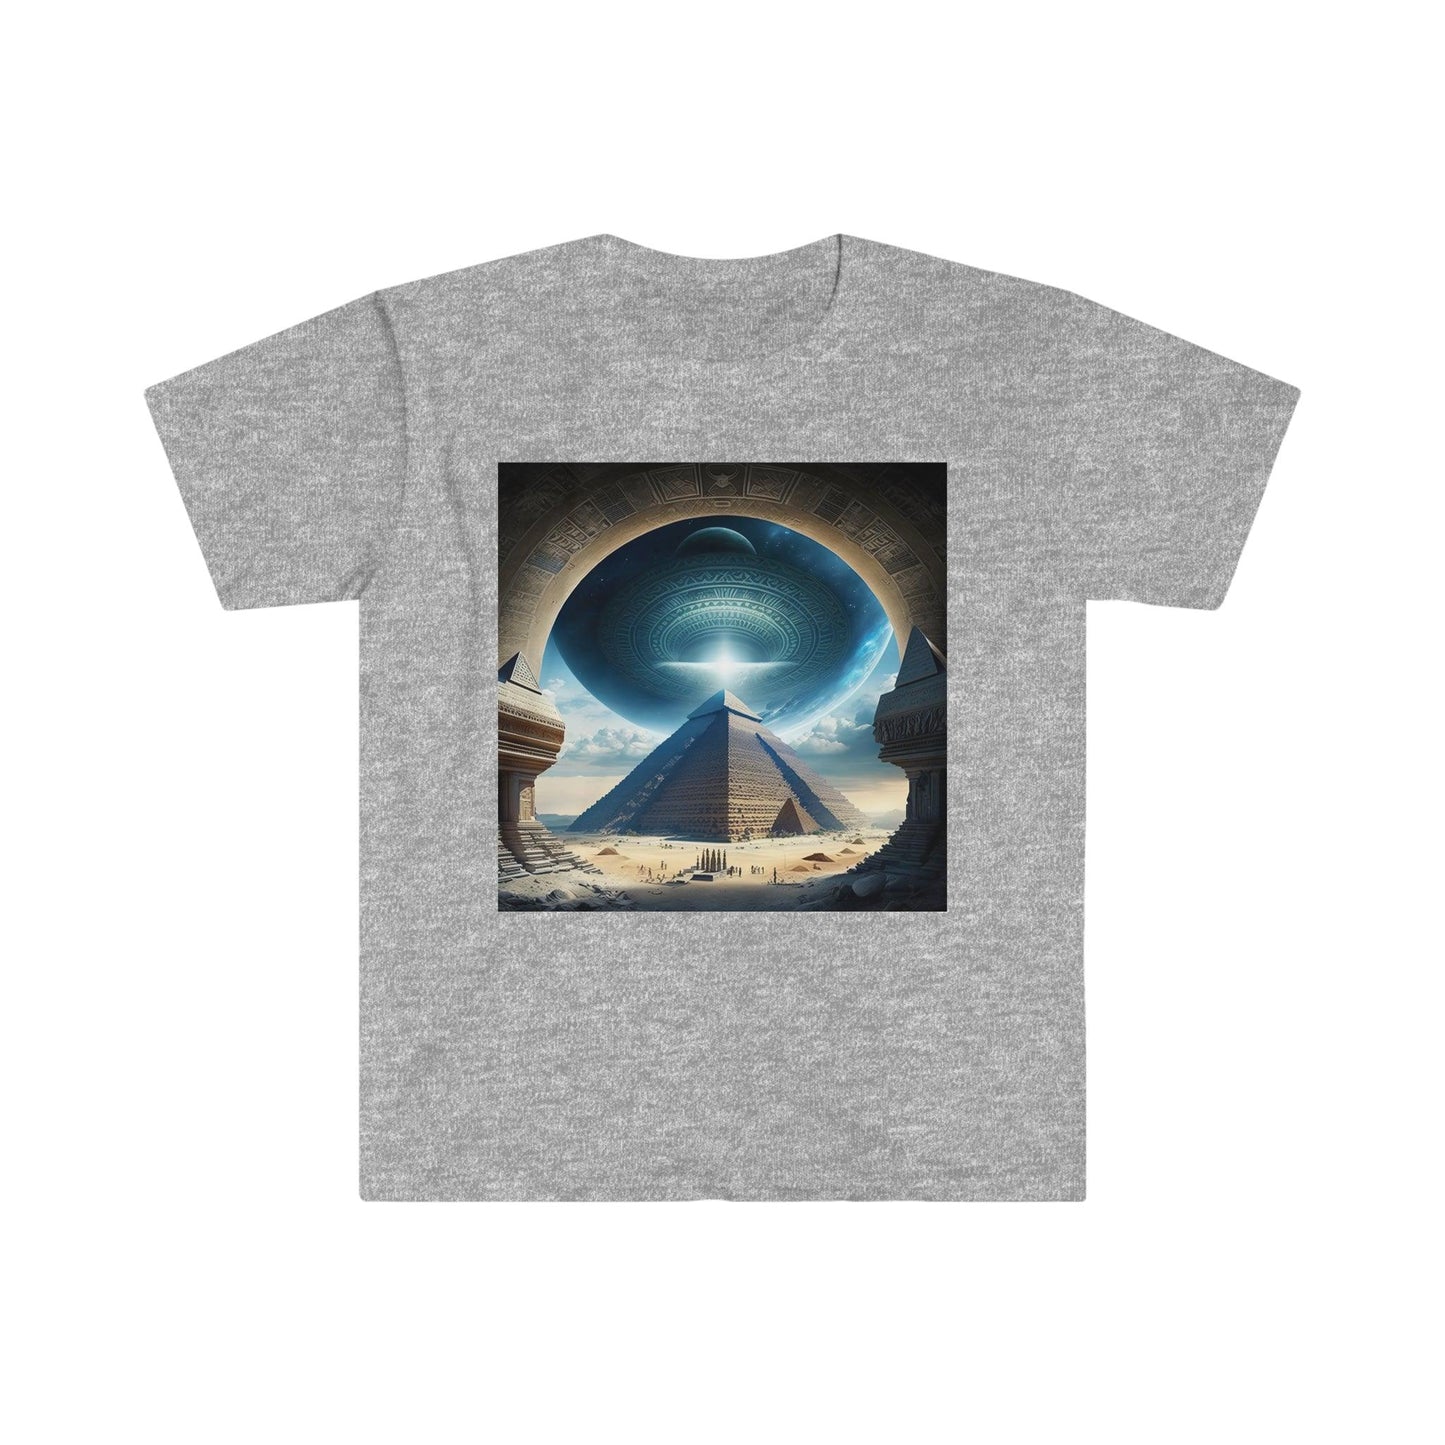 Psychedelic Ai Art Men's and Women's Unisex T-Shirt for Festival and Street Wear Pyramids v5.1 - Alchemystics.org